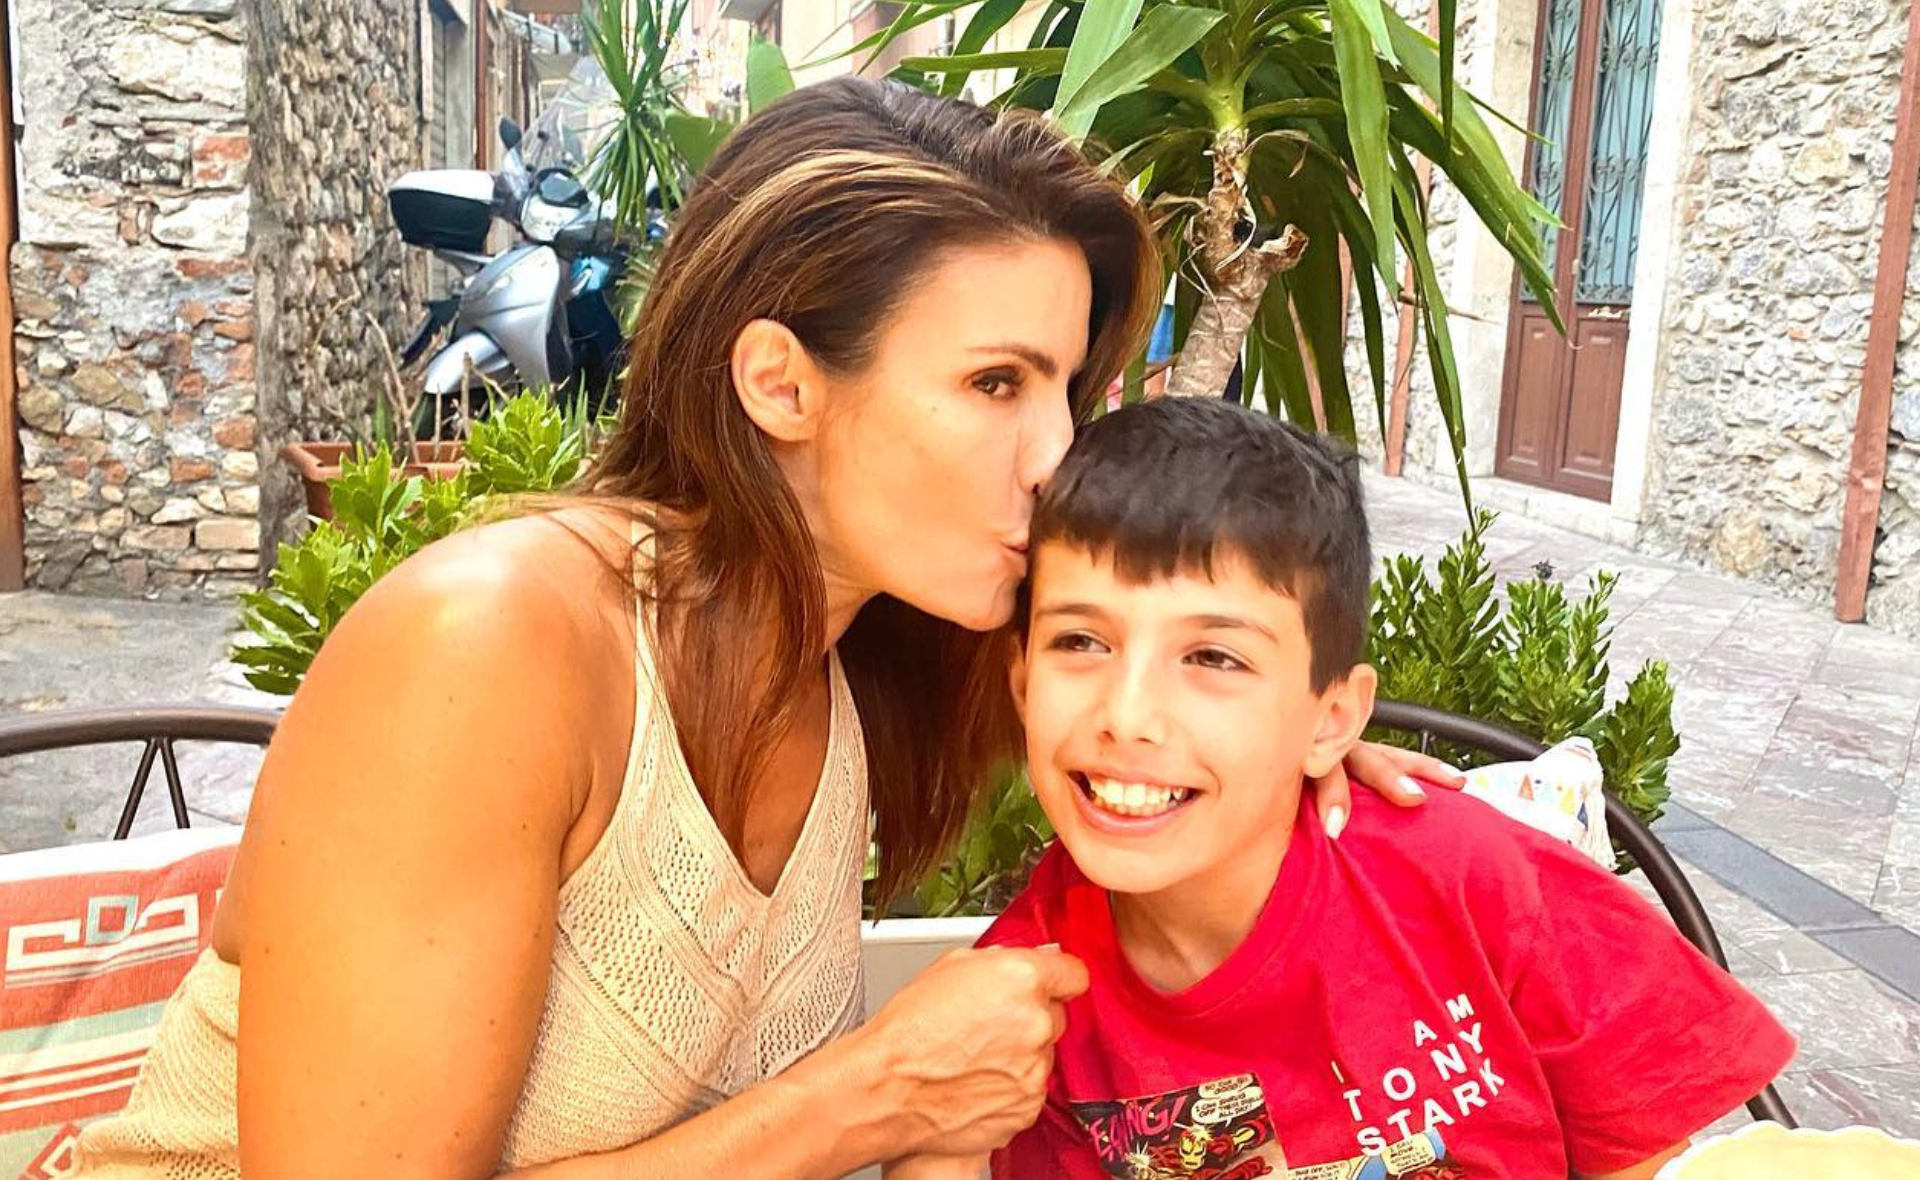 Ada Nicodemou reveals the Christmas “magic” has changed as her son, Johnas gets older